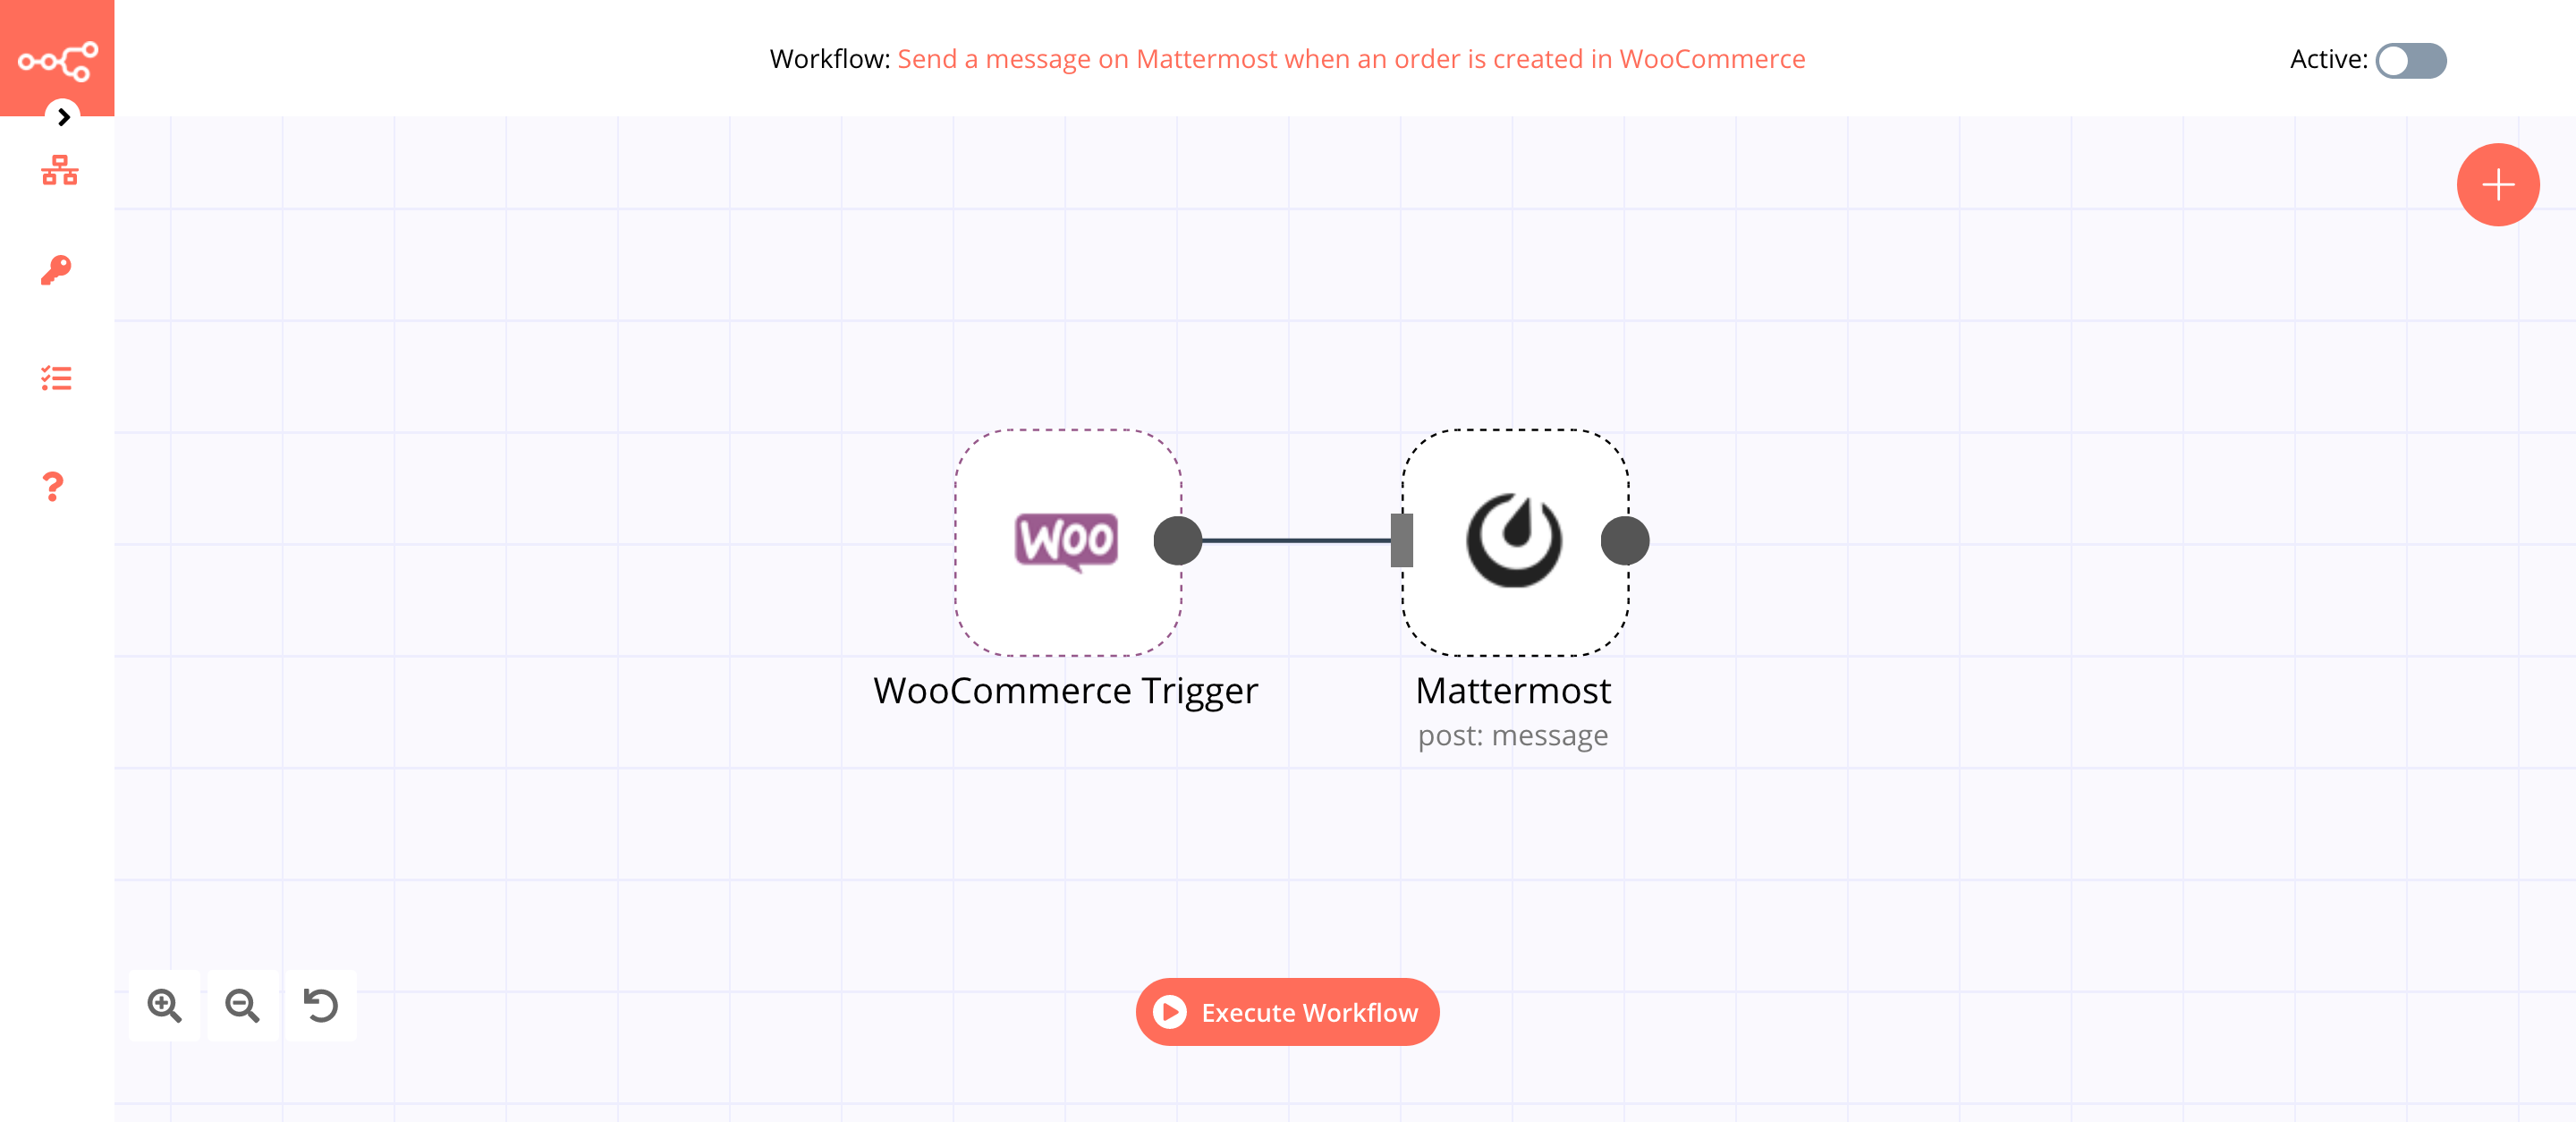 A workflow with the WooCommerce Trigger node